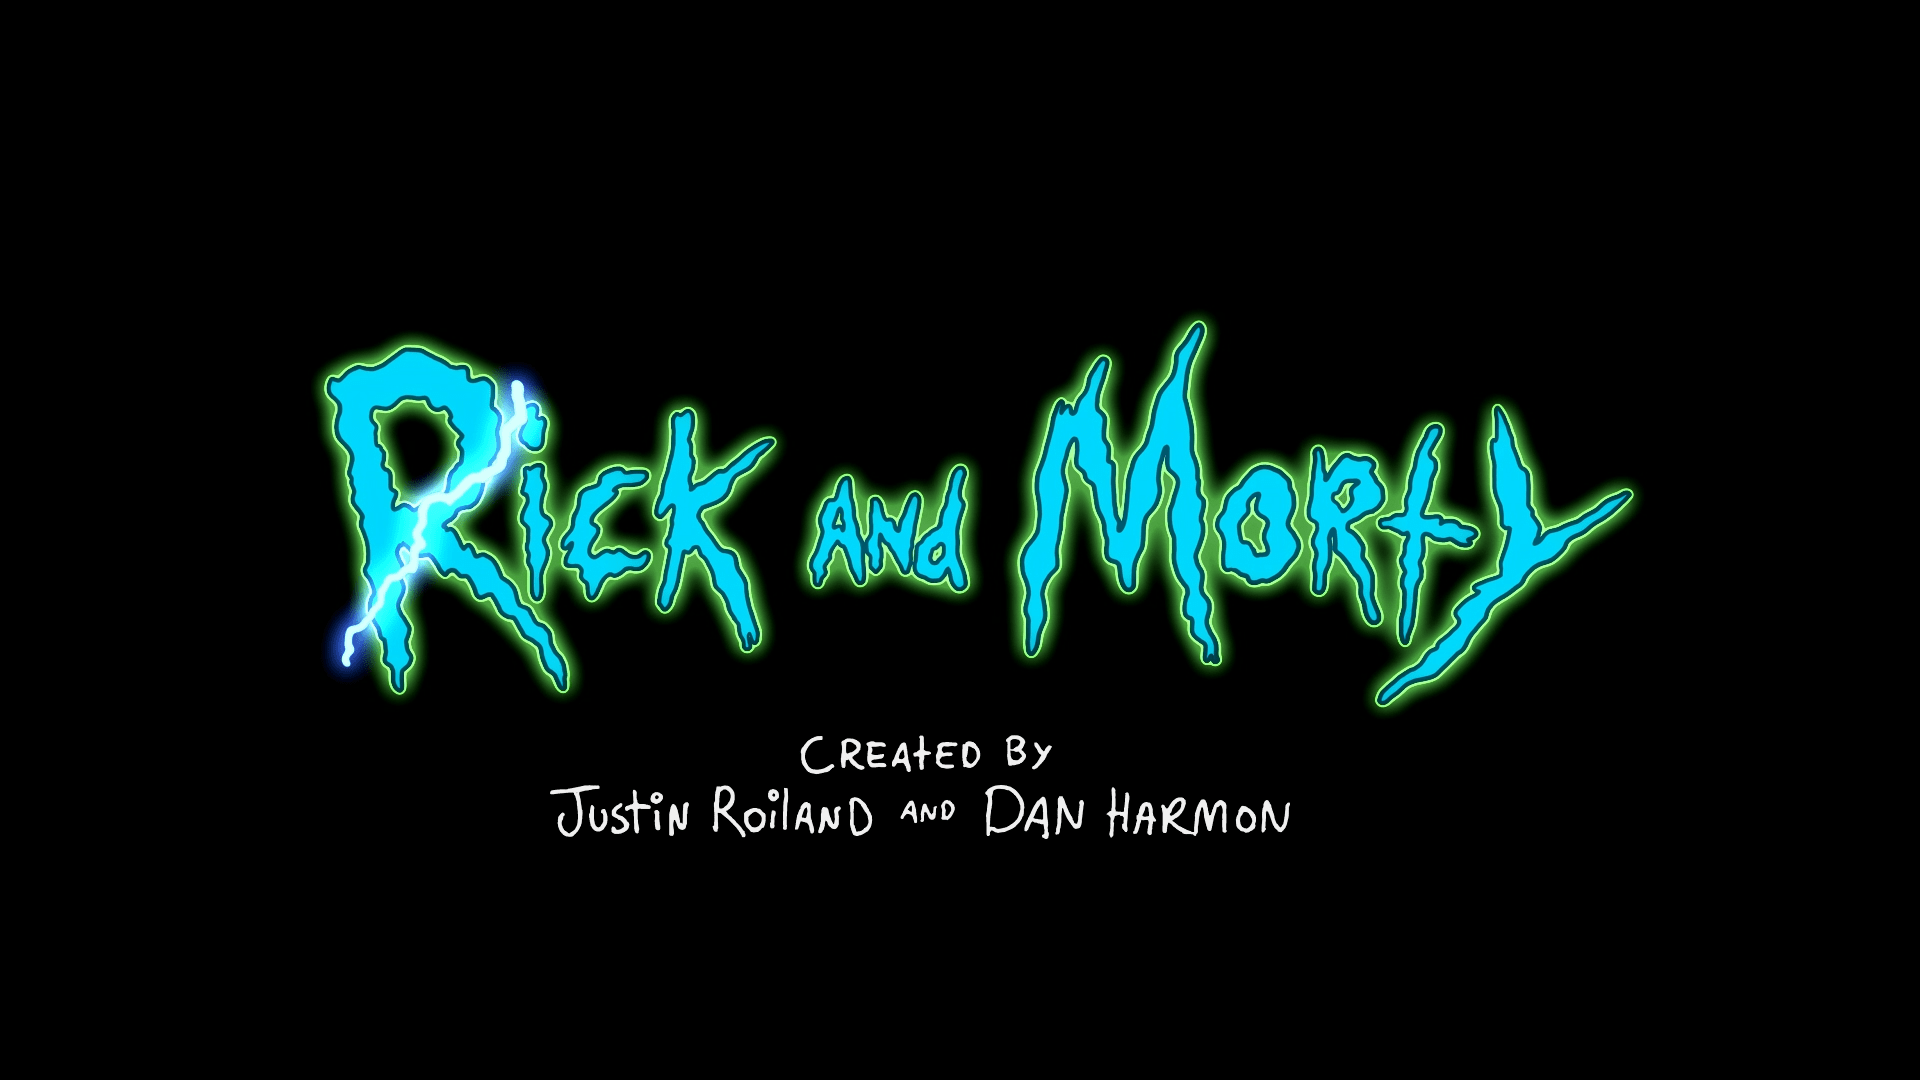 rick and morty title card